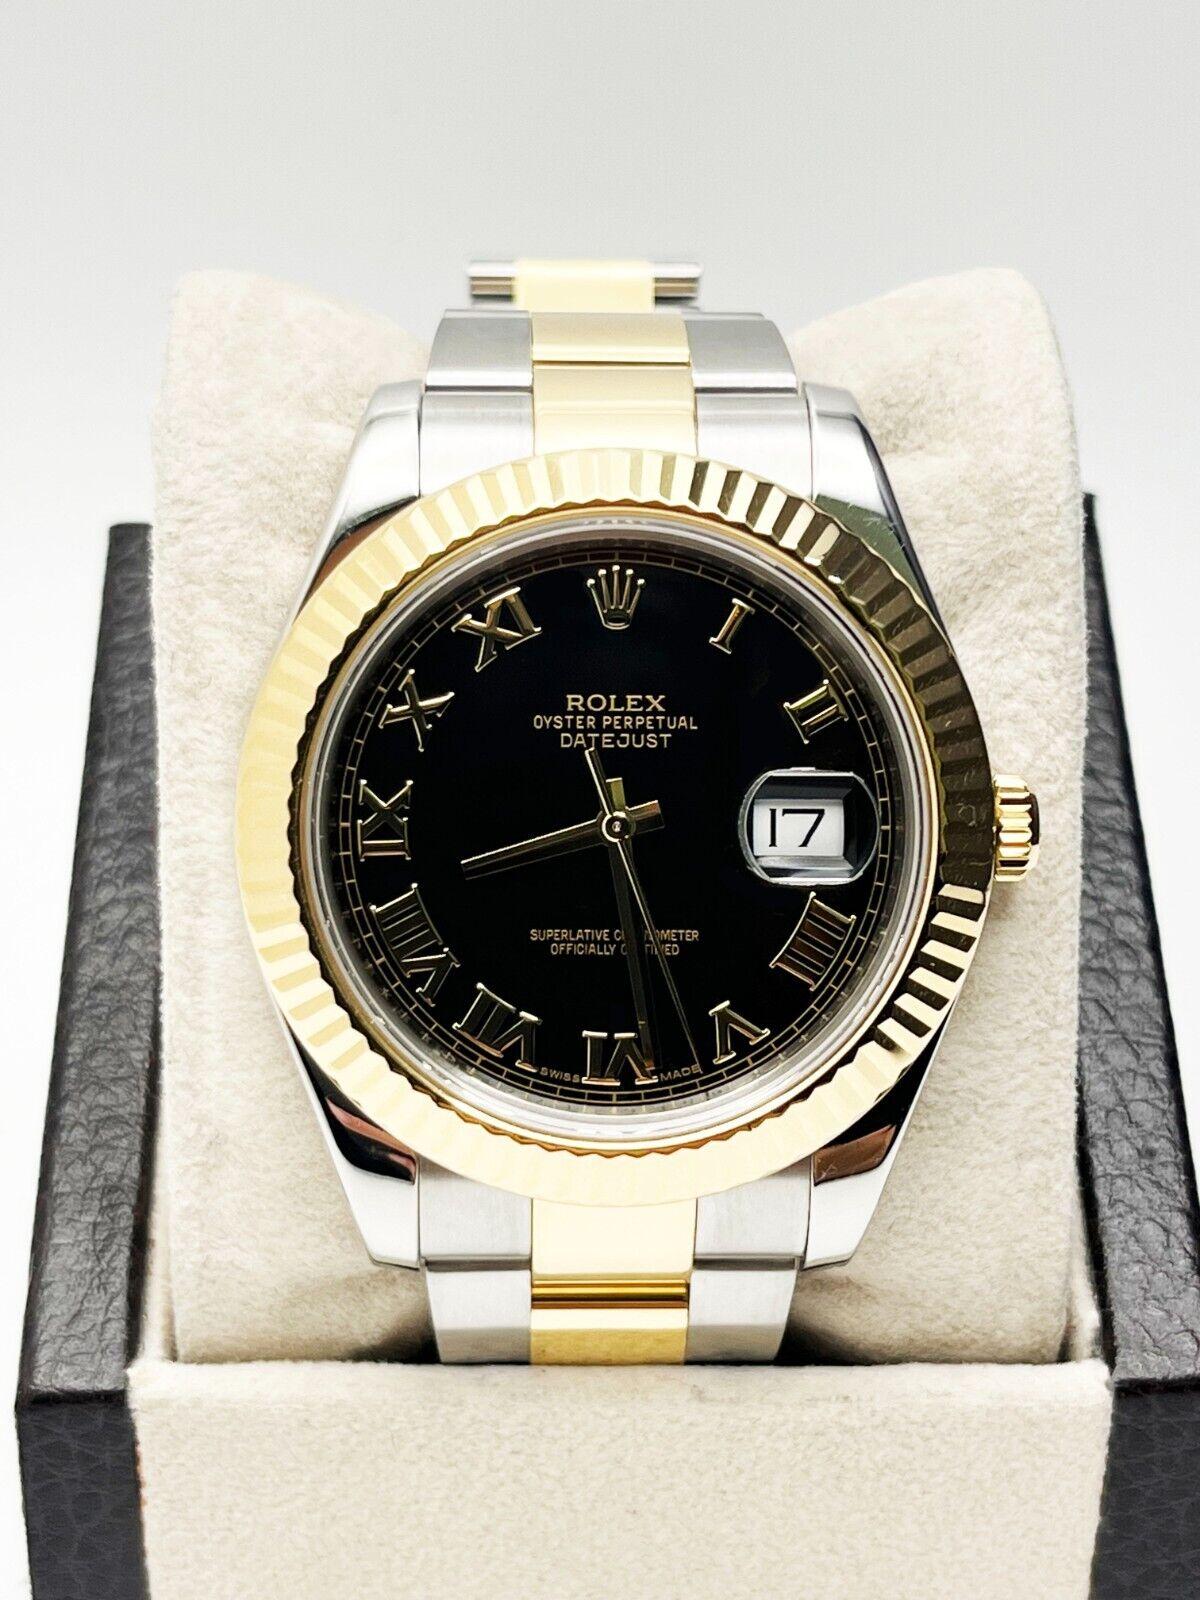 
Style Number: 116333



Serial: 6SLC2***



Year: 2014

 

Model: Datejust 41

 

Case Material: 

 

Band: 18K Yellow Gold & Stainless Steel 

 

Bezel: 18K Yellow Gold Fluted Bezel 

 

Dial: Black Roman Numeral Dial 

 

Face: Sapphire Crystal